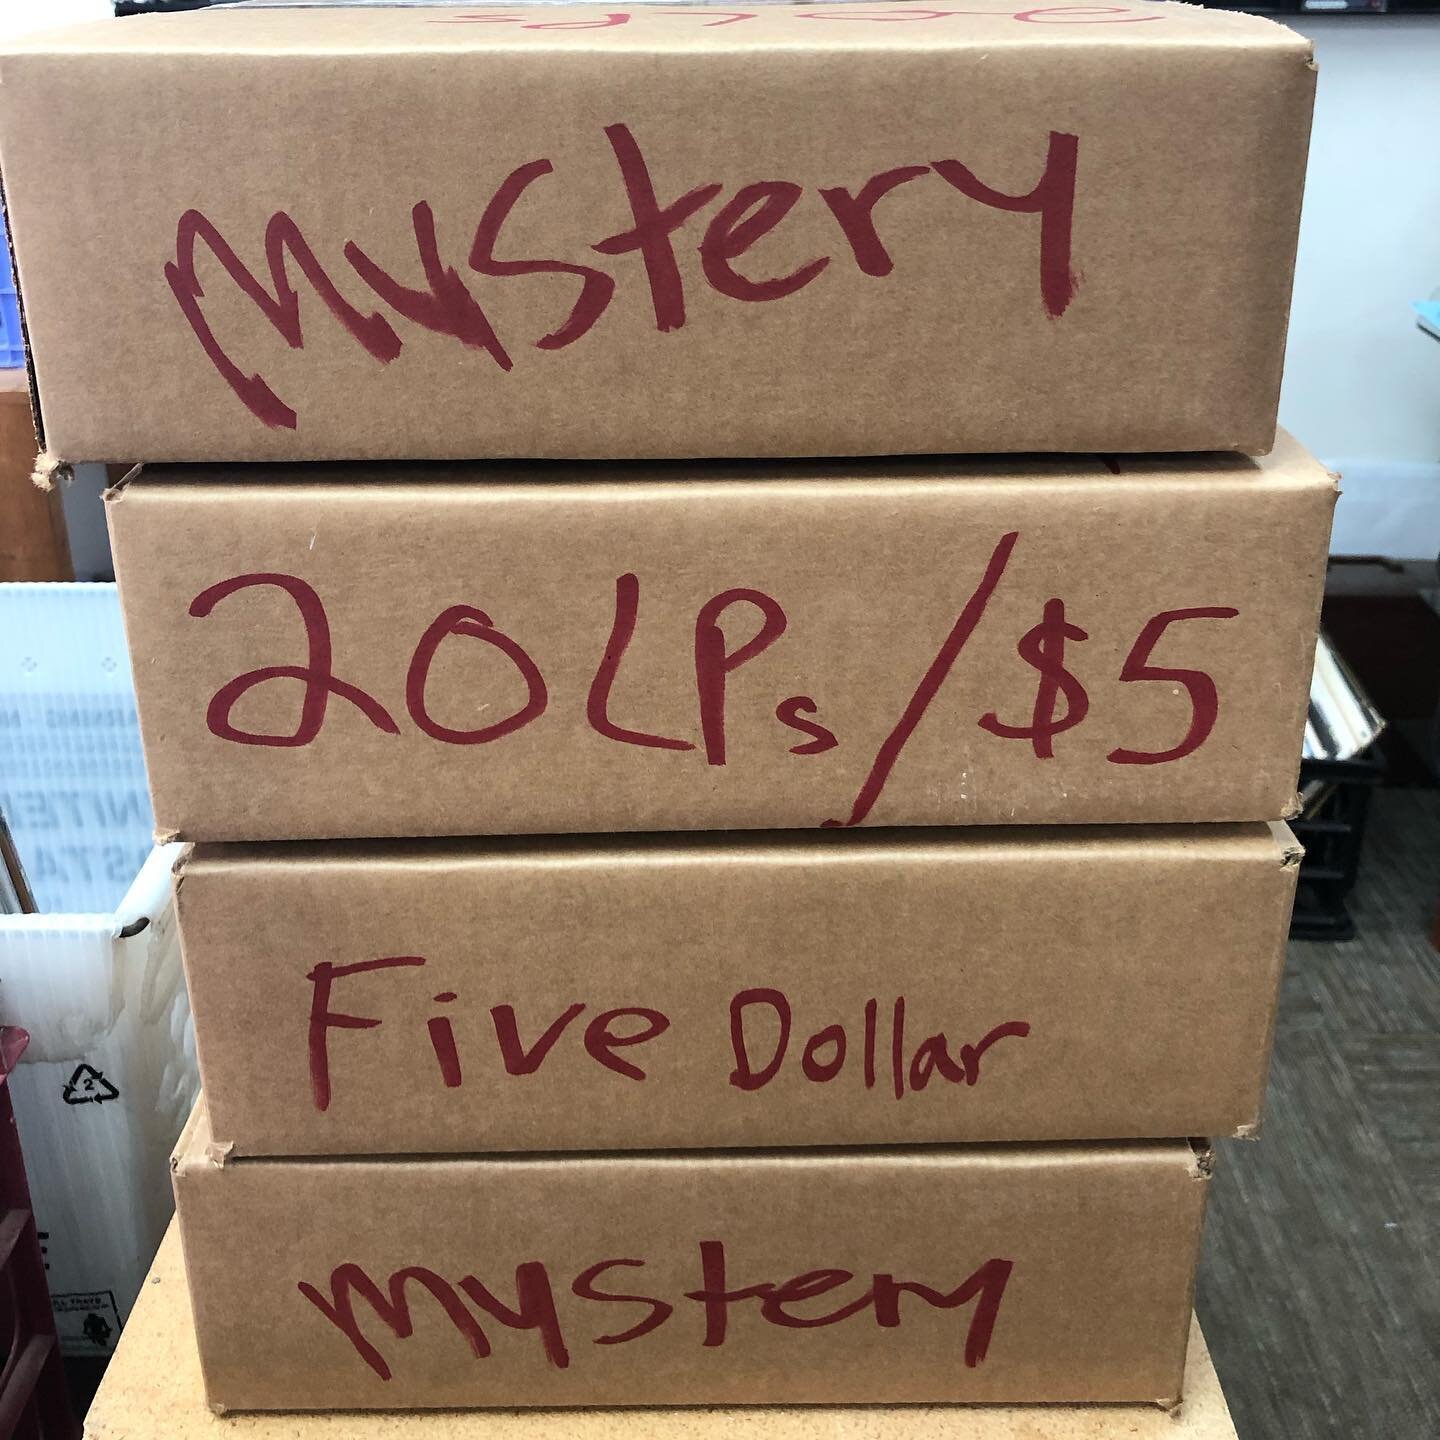 Mystery boxes are back!!! $5 buys you 20 or more LPs easily worth 2-4x the price of admission... Pickup only for these - no sense on spending $ for postage. In store only unless you want to call and pay over the phone - otherwise no holds. When these